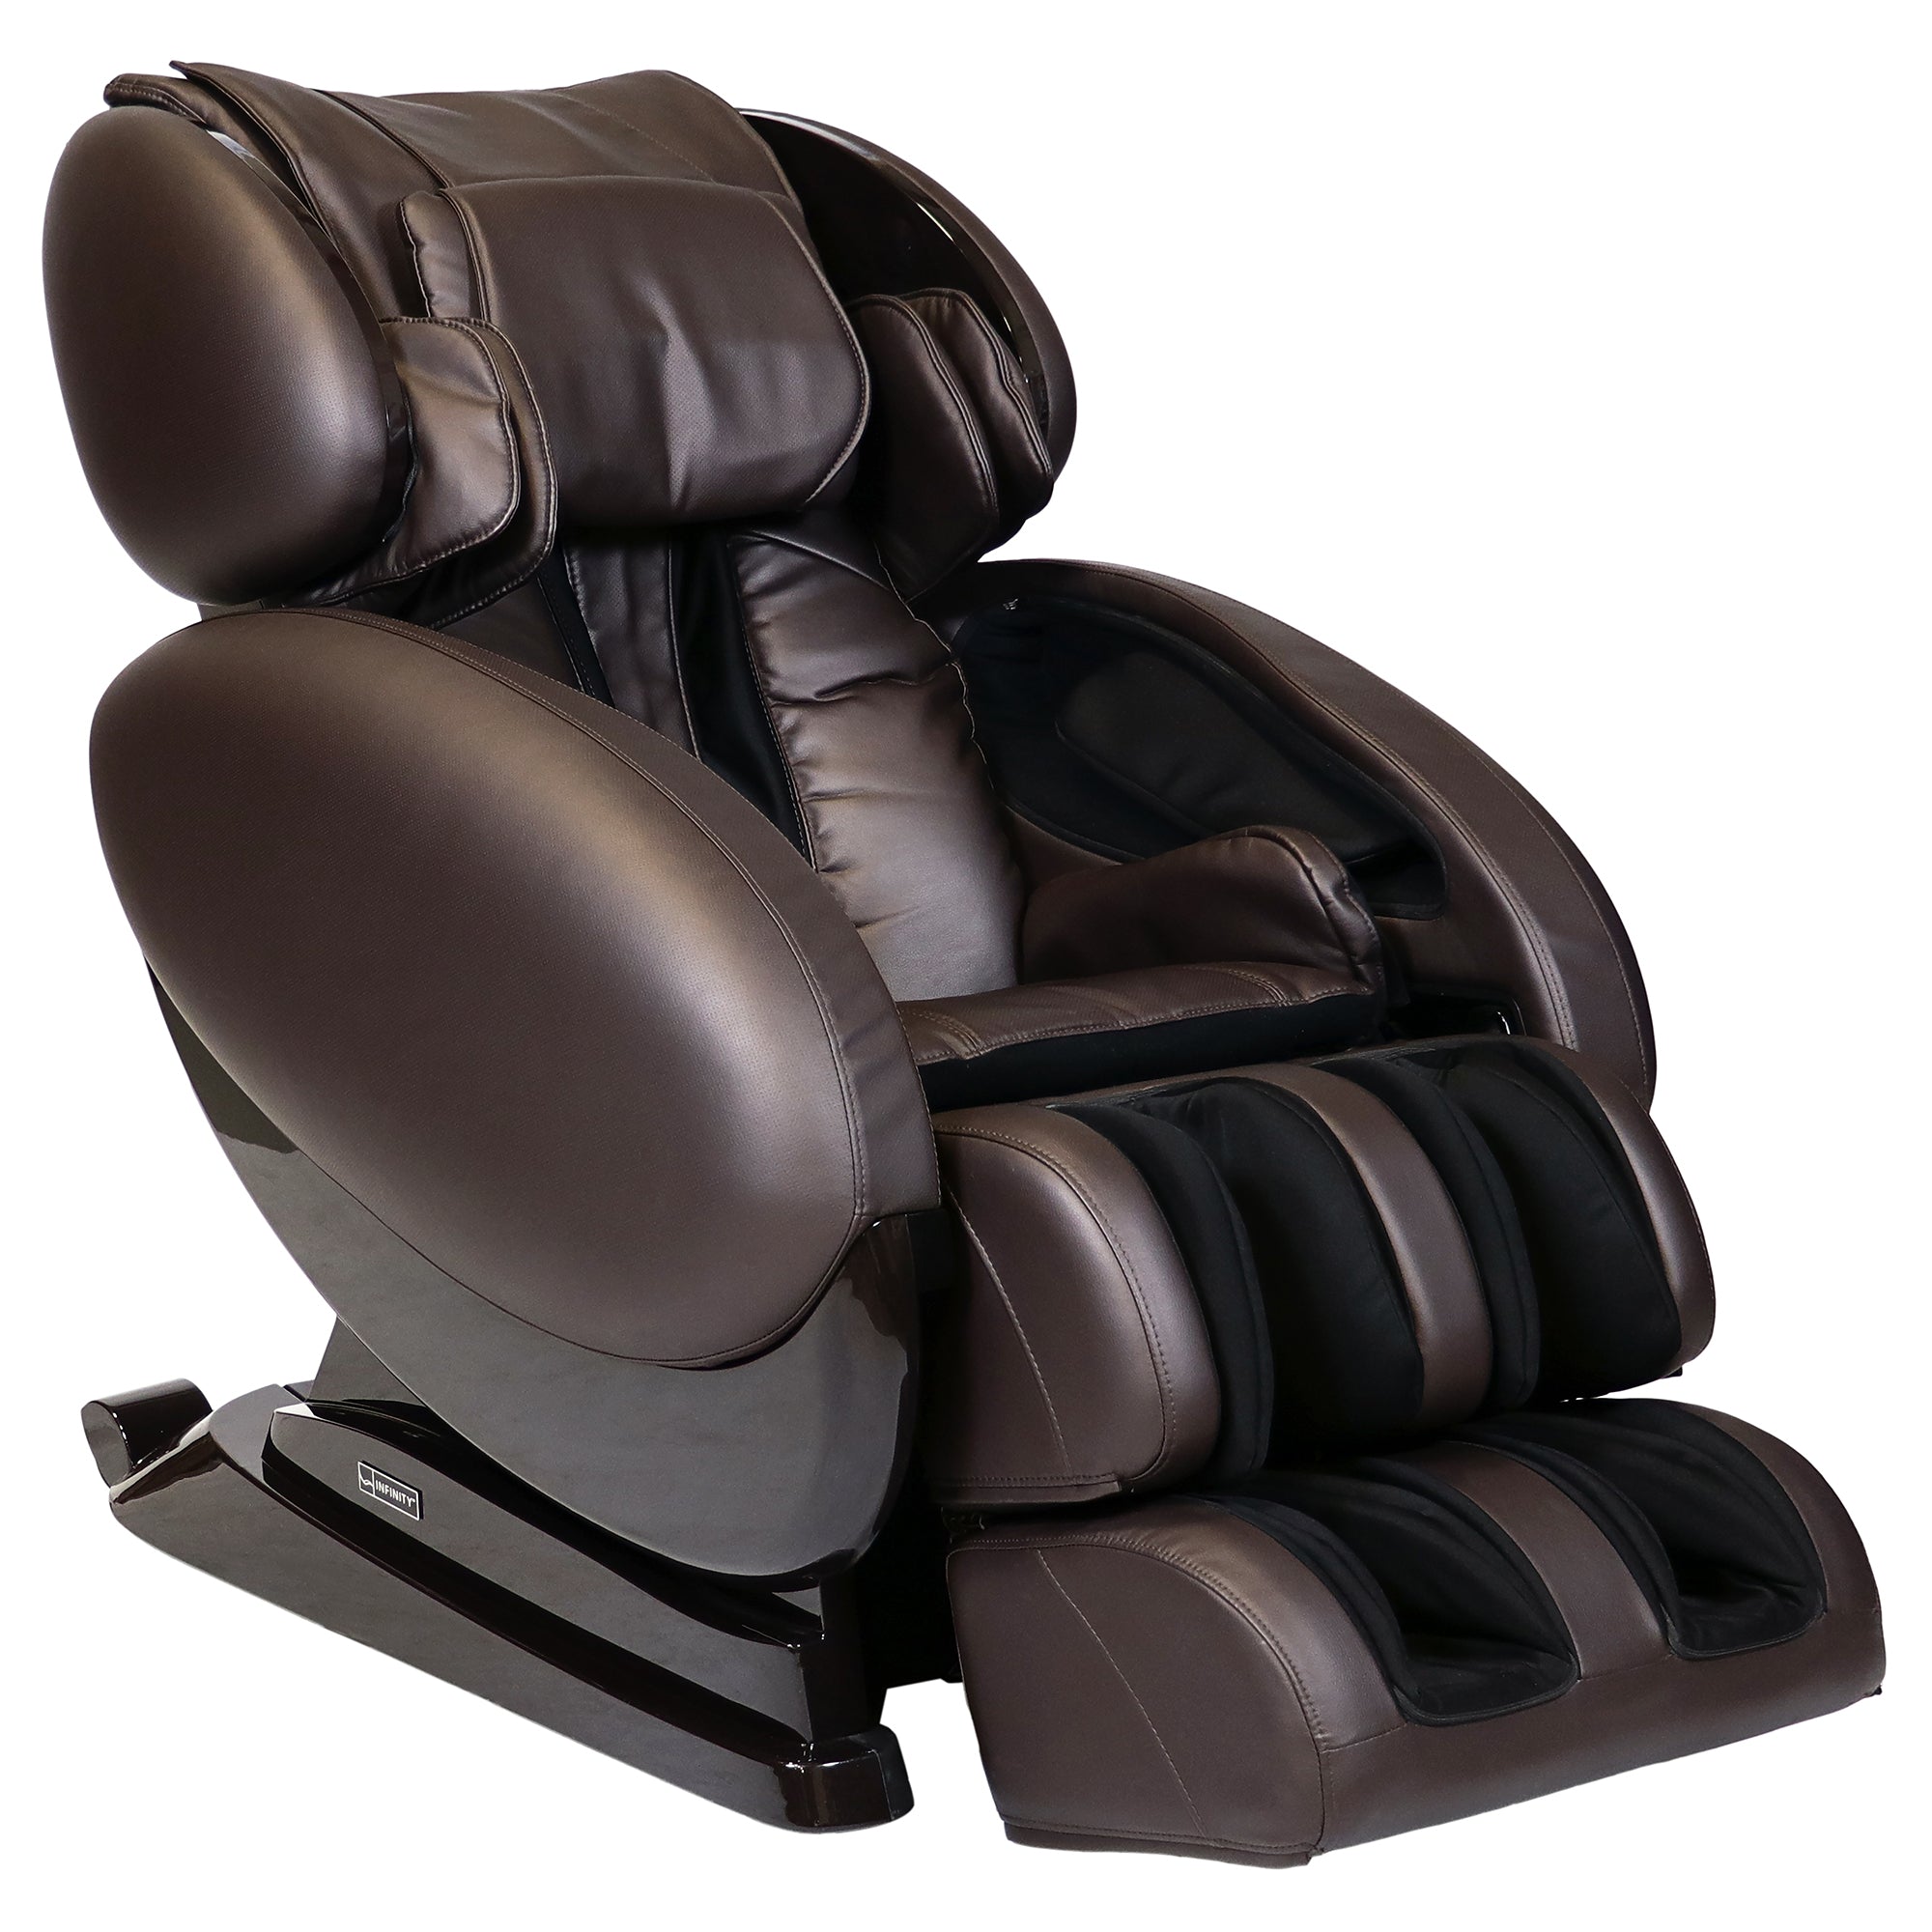 Infinity IT-8500 Plus Massage Chair Therapy Chairs Infinity Brown 